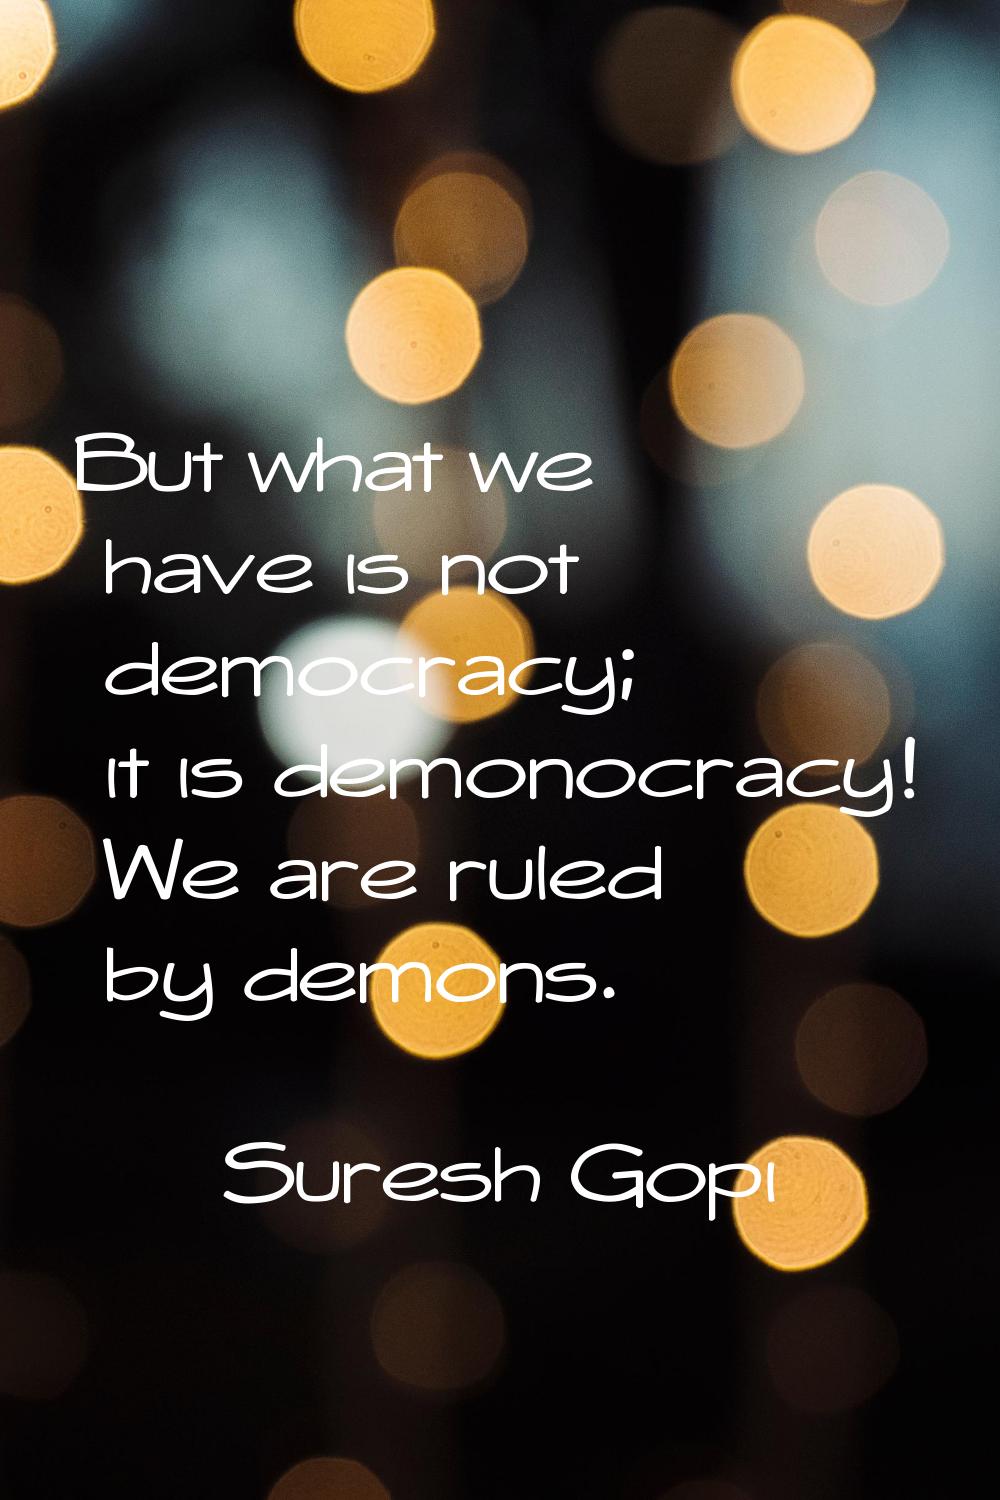 But what we have is not democracy; it is demonocracy! We are ruled by demons.